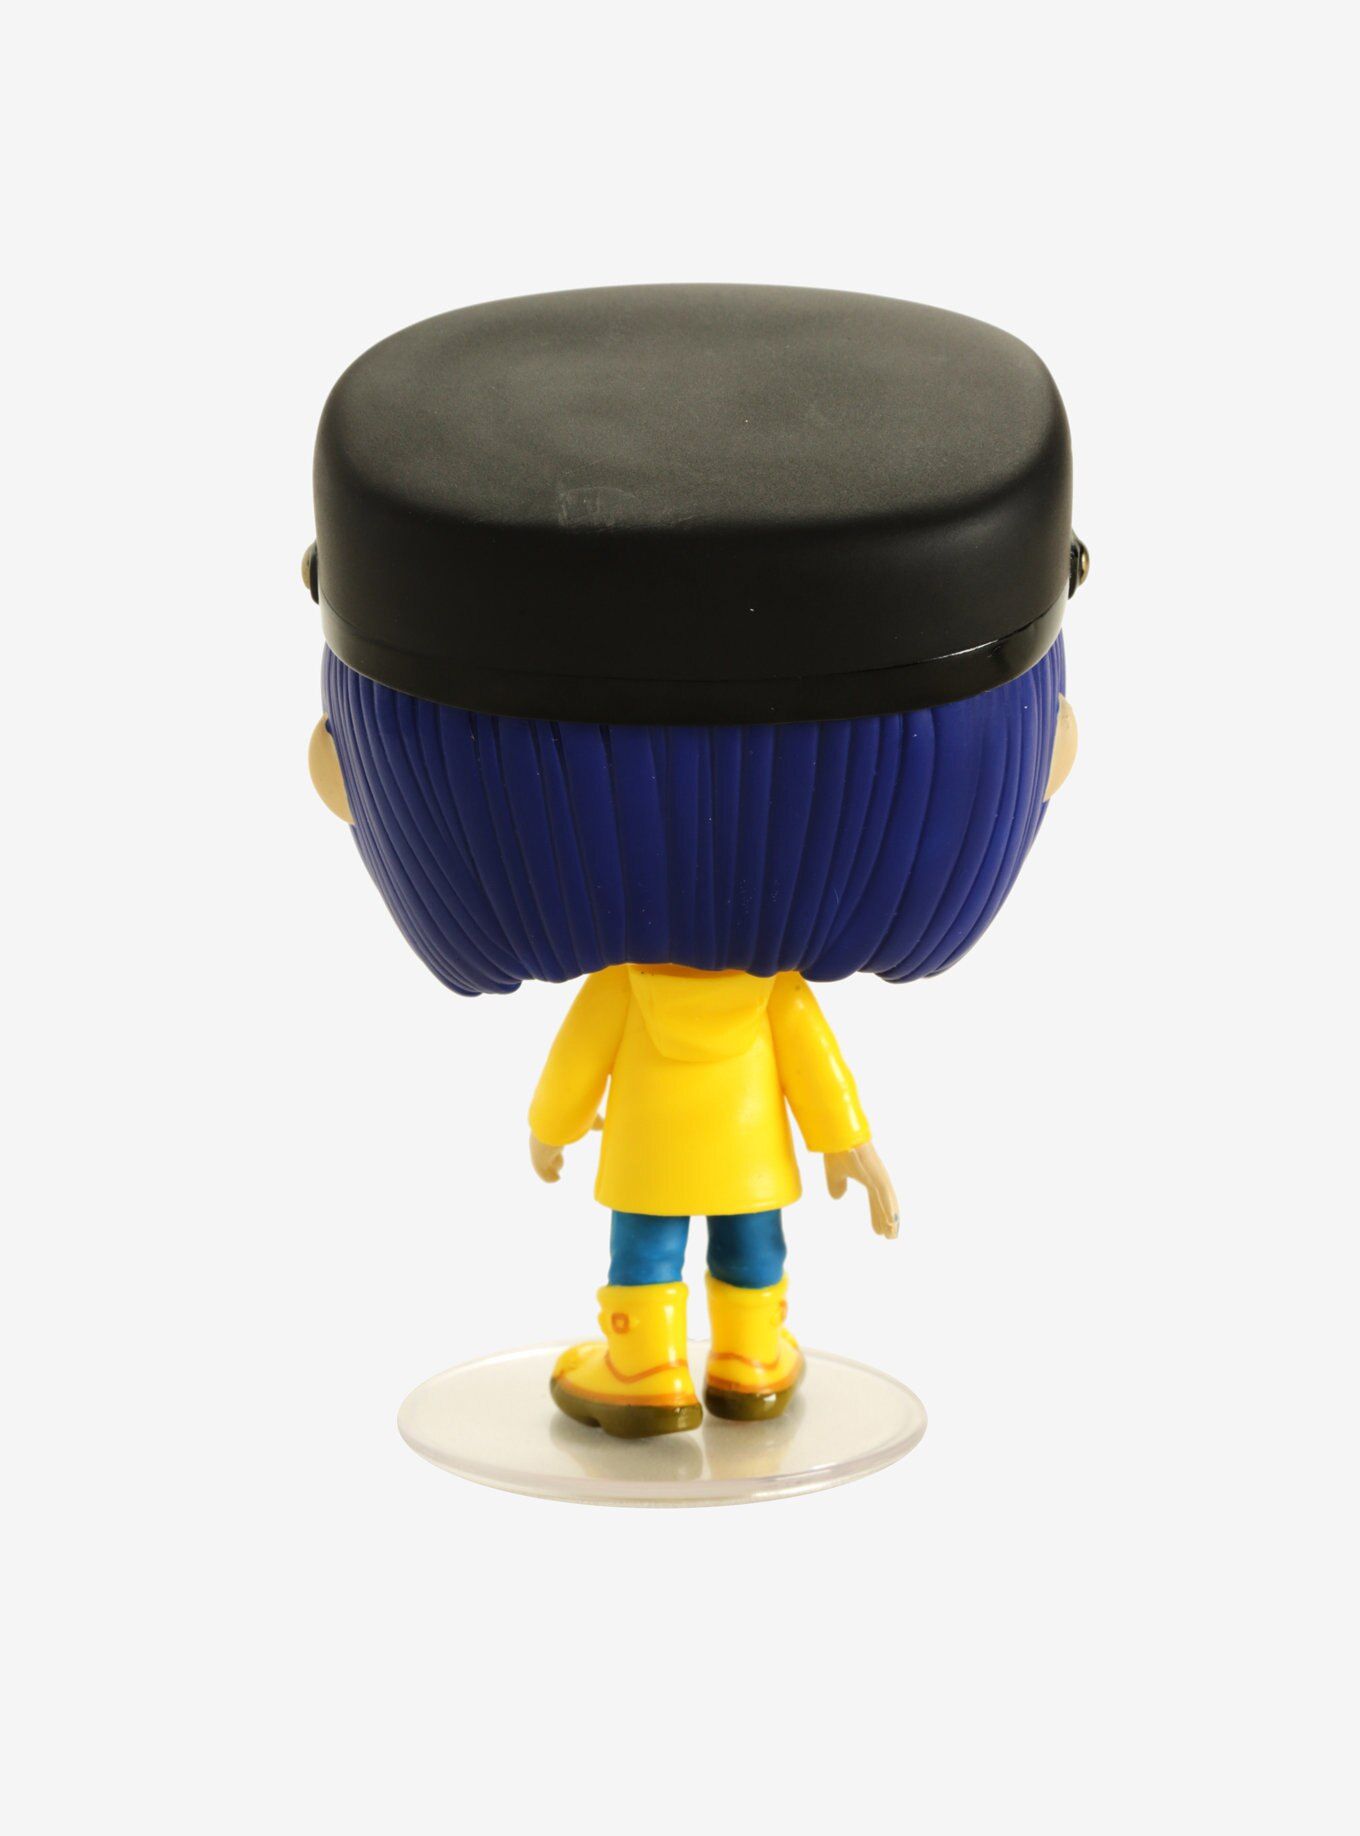 Coraline in Raincoat #423 - Funko Pop! Animation Chase Limited Edition